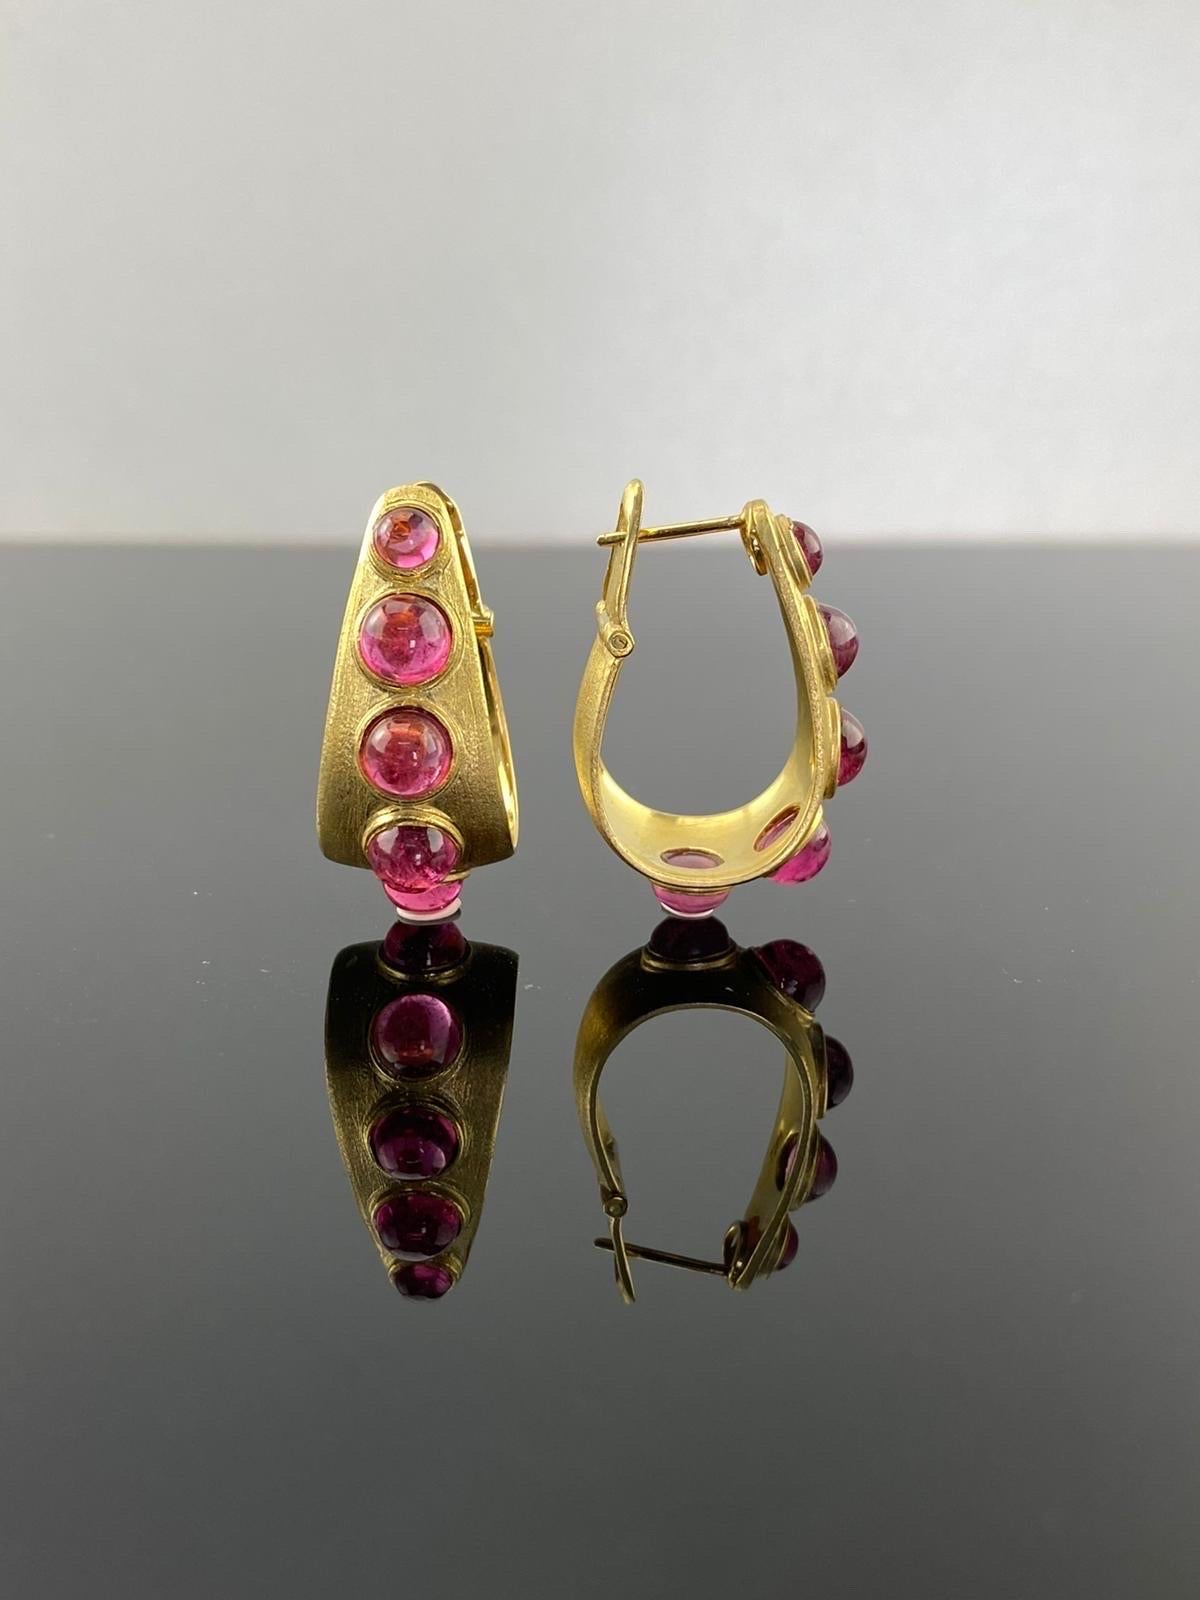 A pair of 18k Gold hoop earrings set with round cabochon Tourmaline. This beautiful statement earrings are great present for yourself or loved ones. Set in solid 18K Gold, with a matte finish polish which make the earrings extra special and